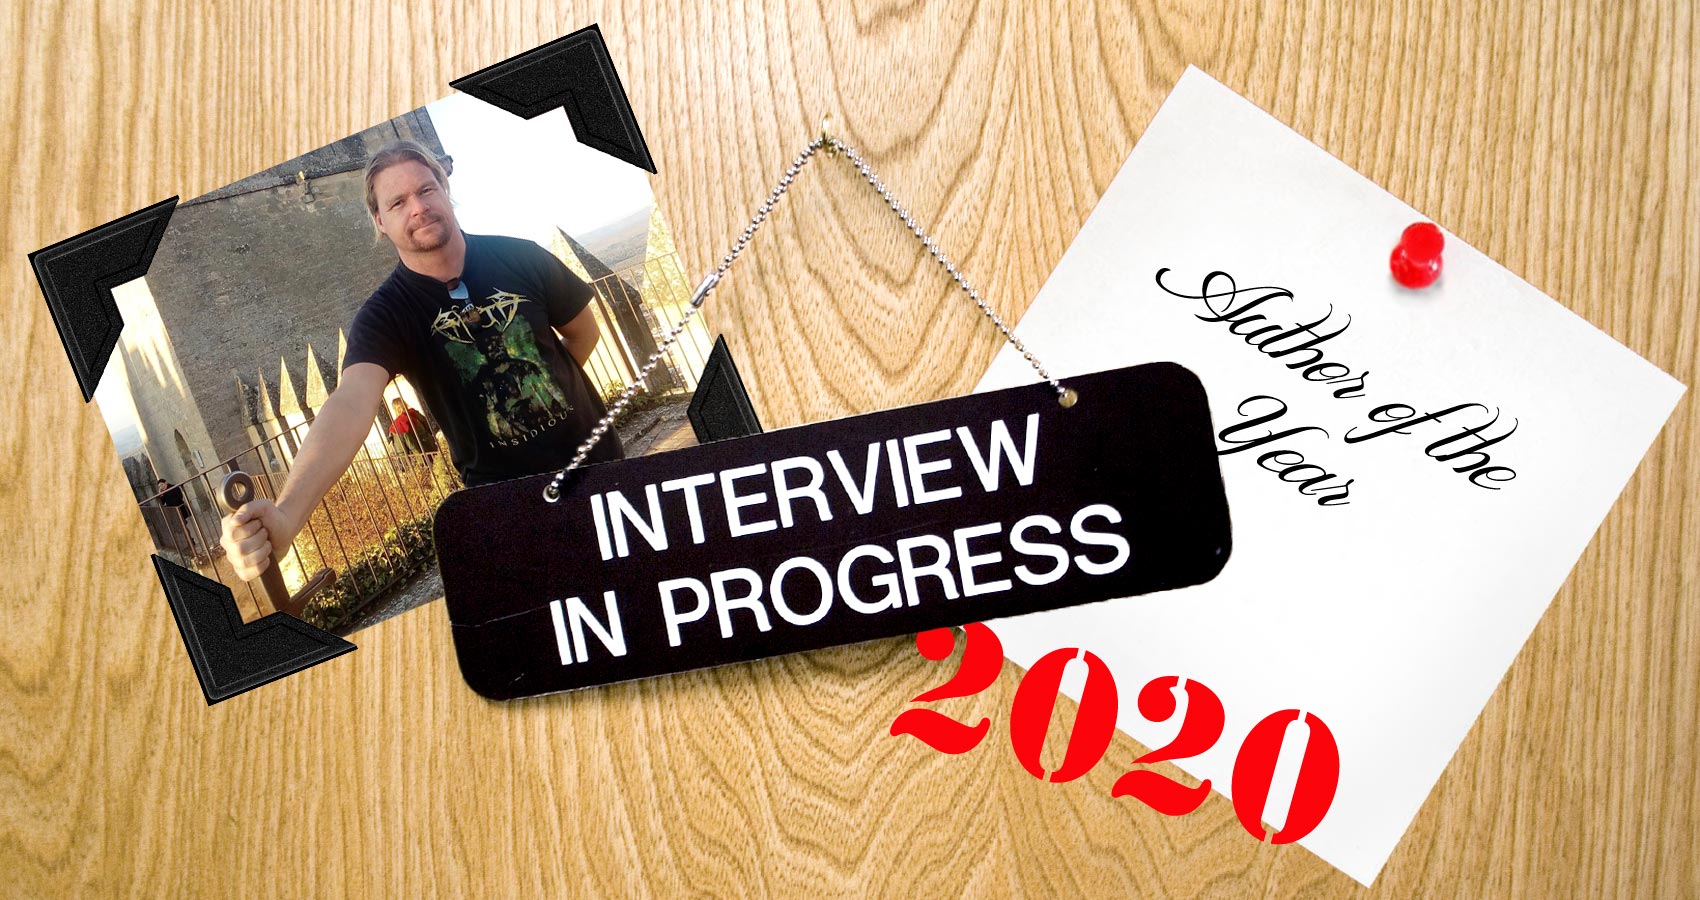 Author Of The Year 2020 Interview with P.C. Darkcliff at Spillwords.com